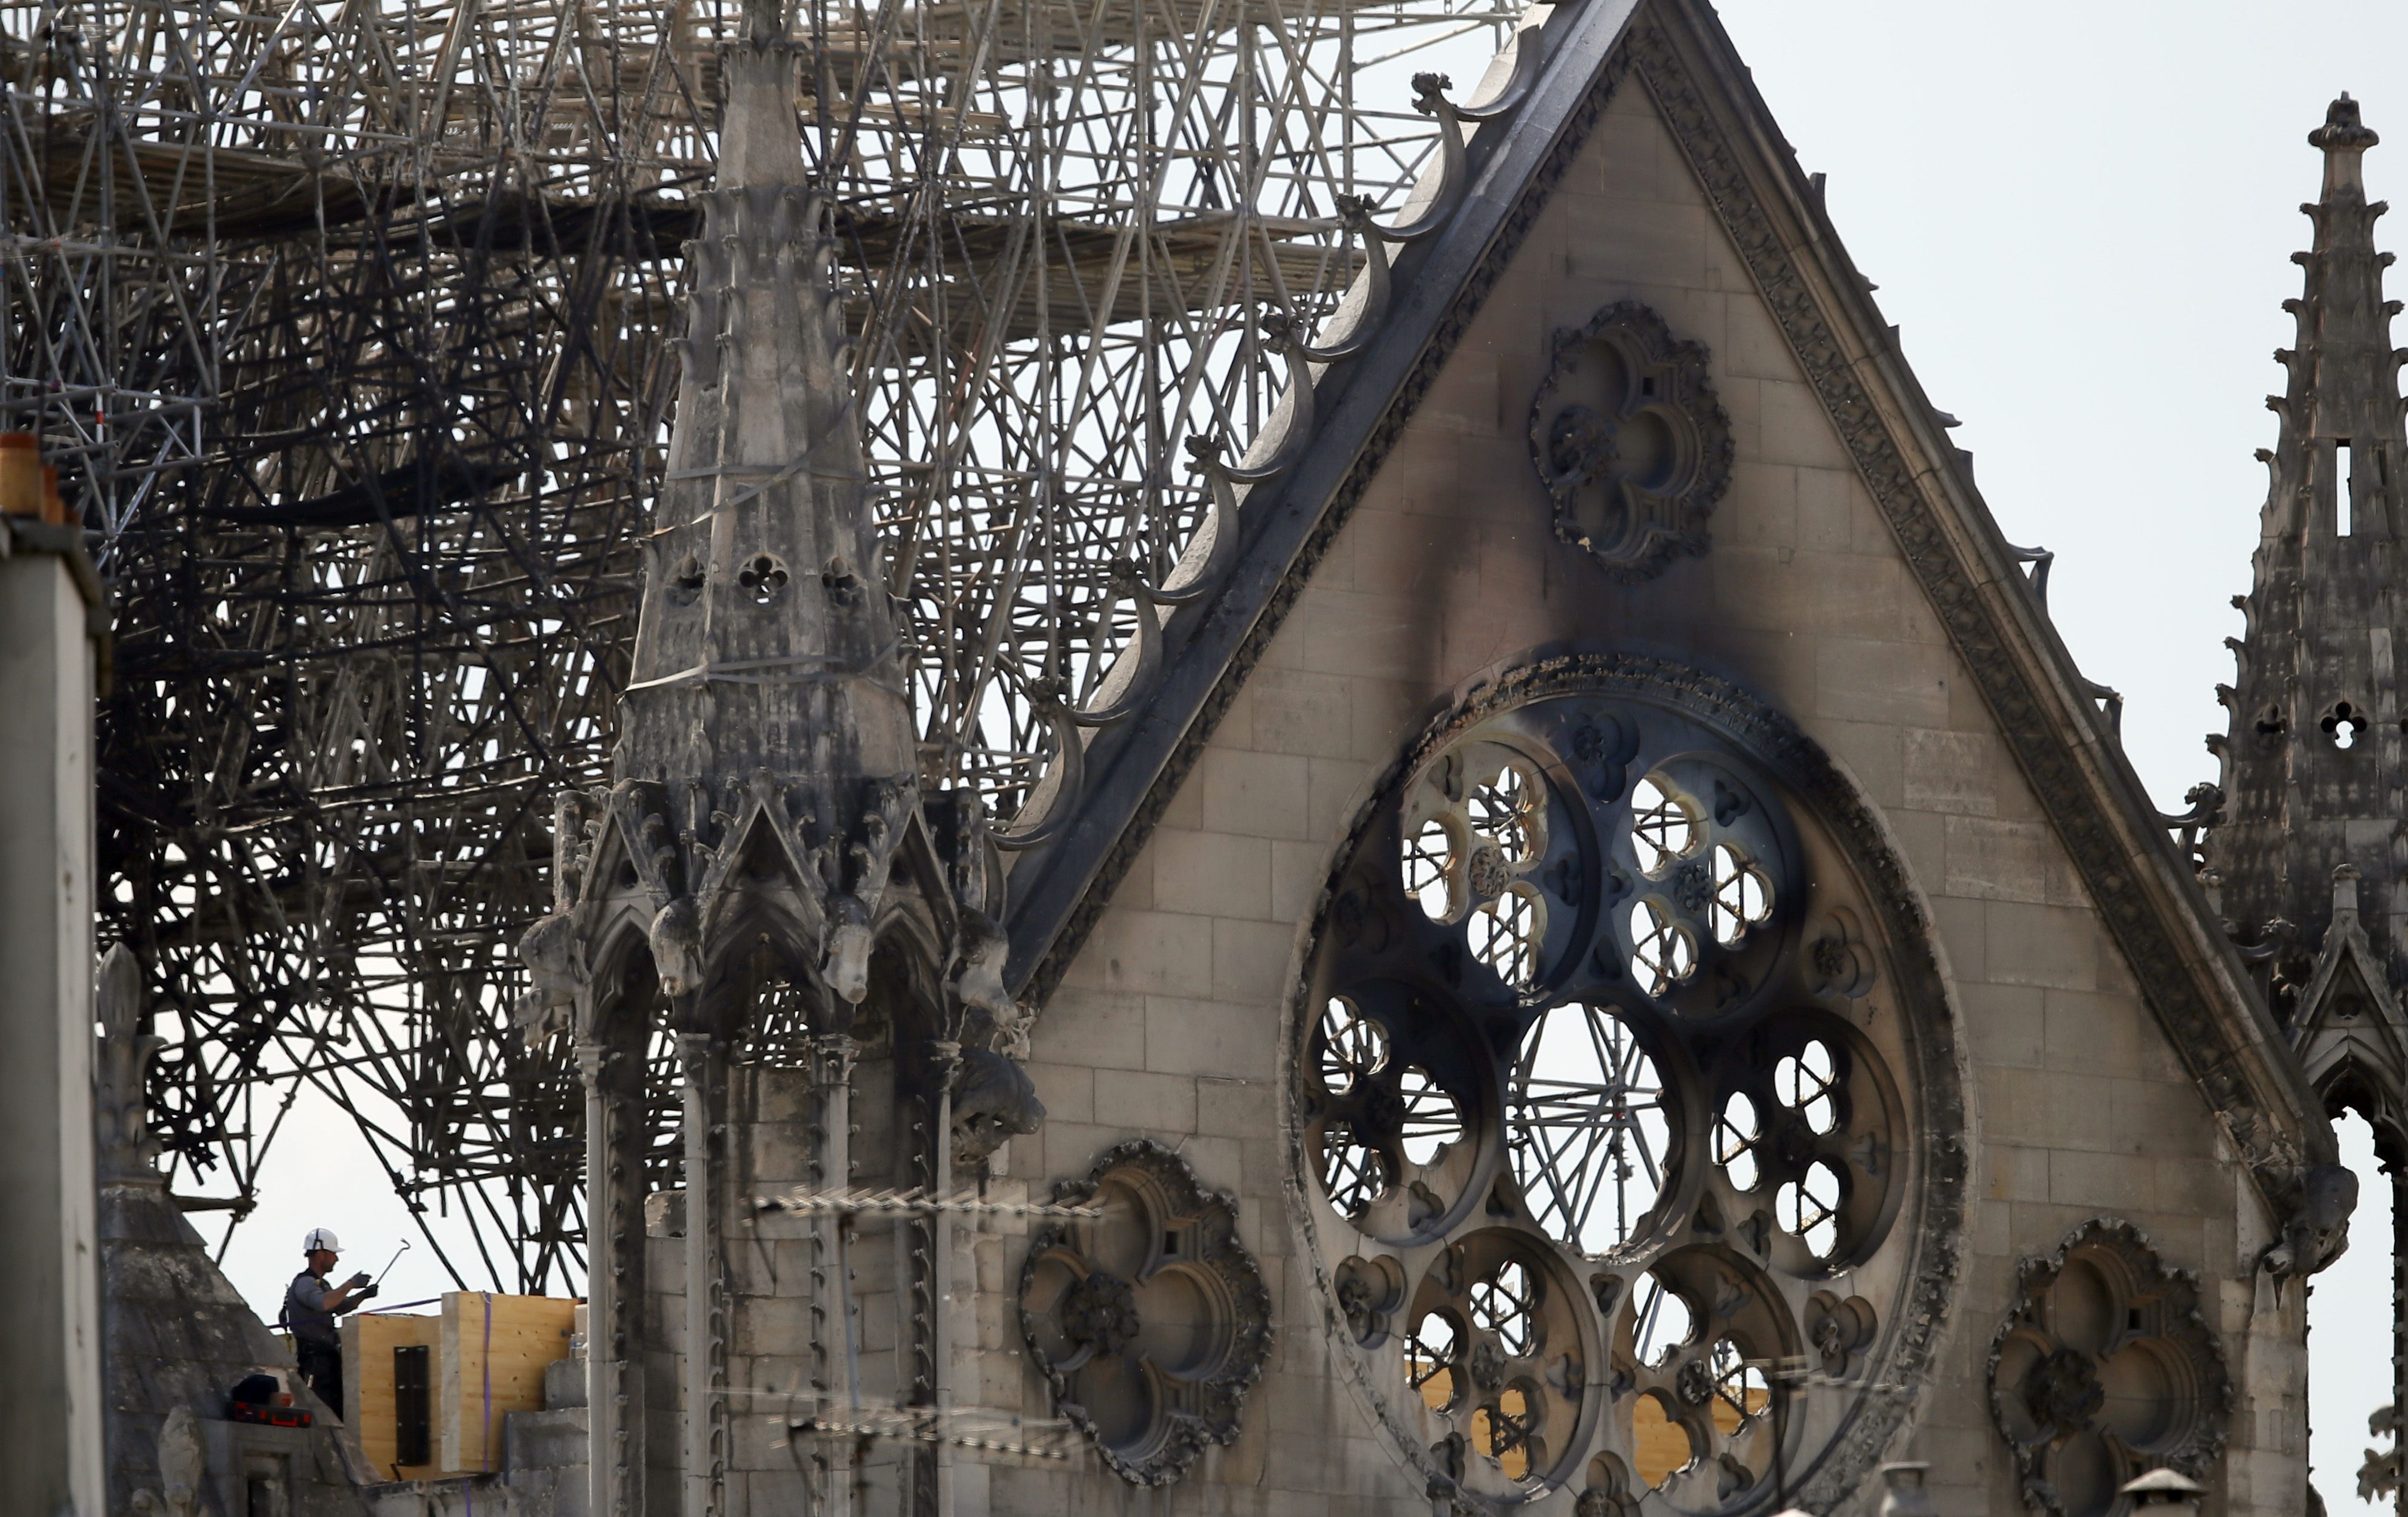 A worker checks on a wooden support structure placed on the Notre Dame Cathedral in Paris, Wednesday, April 17, 2019. Nearly $1 billion has already poured in from ordinary worshippers and high-powered magnates around the world to restore Notre Dame Cathedral in Paris after a massive fire. (AP Photo/Francois Mori)